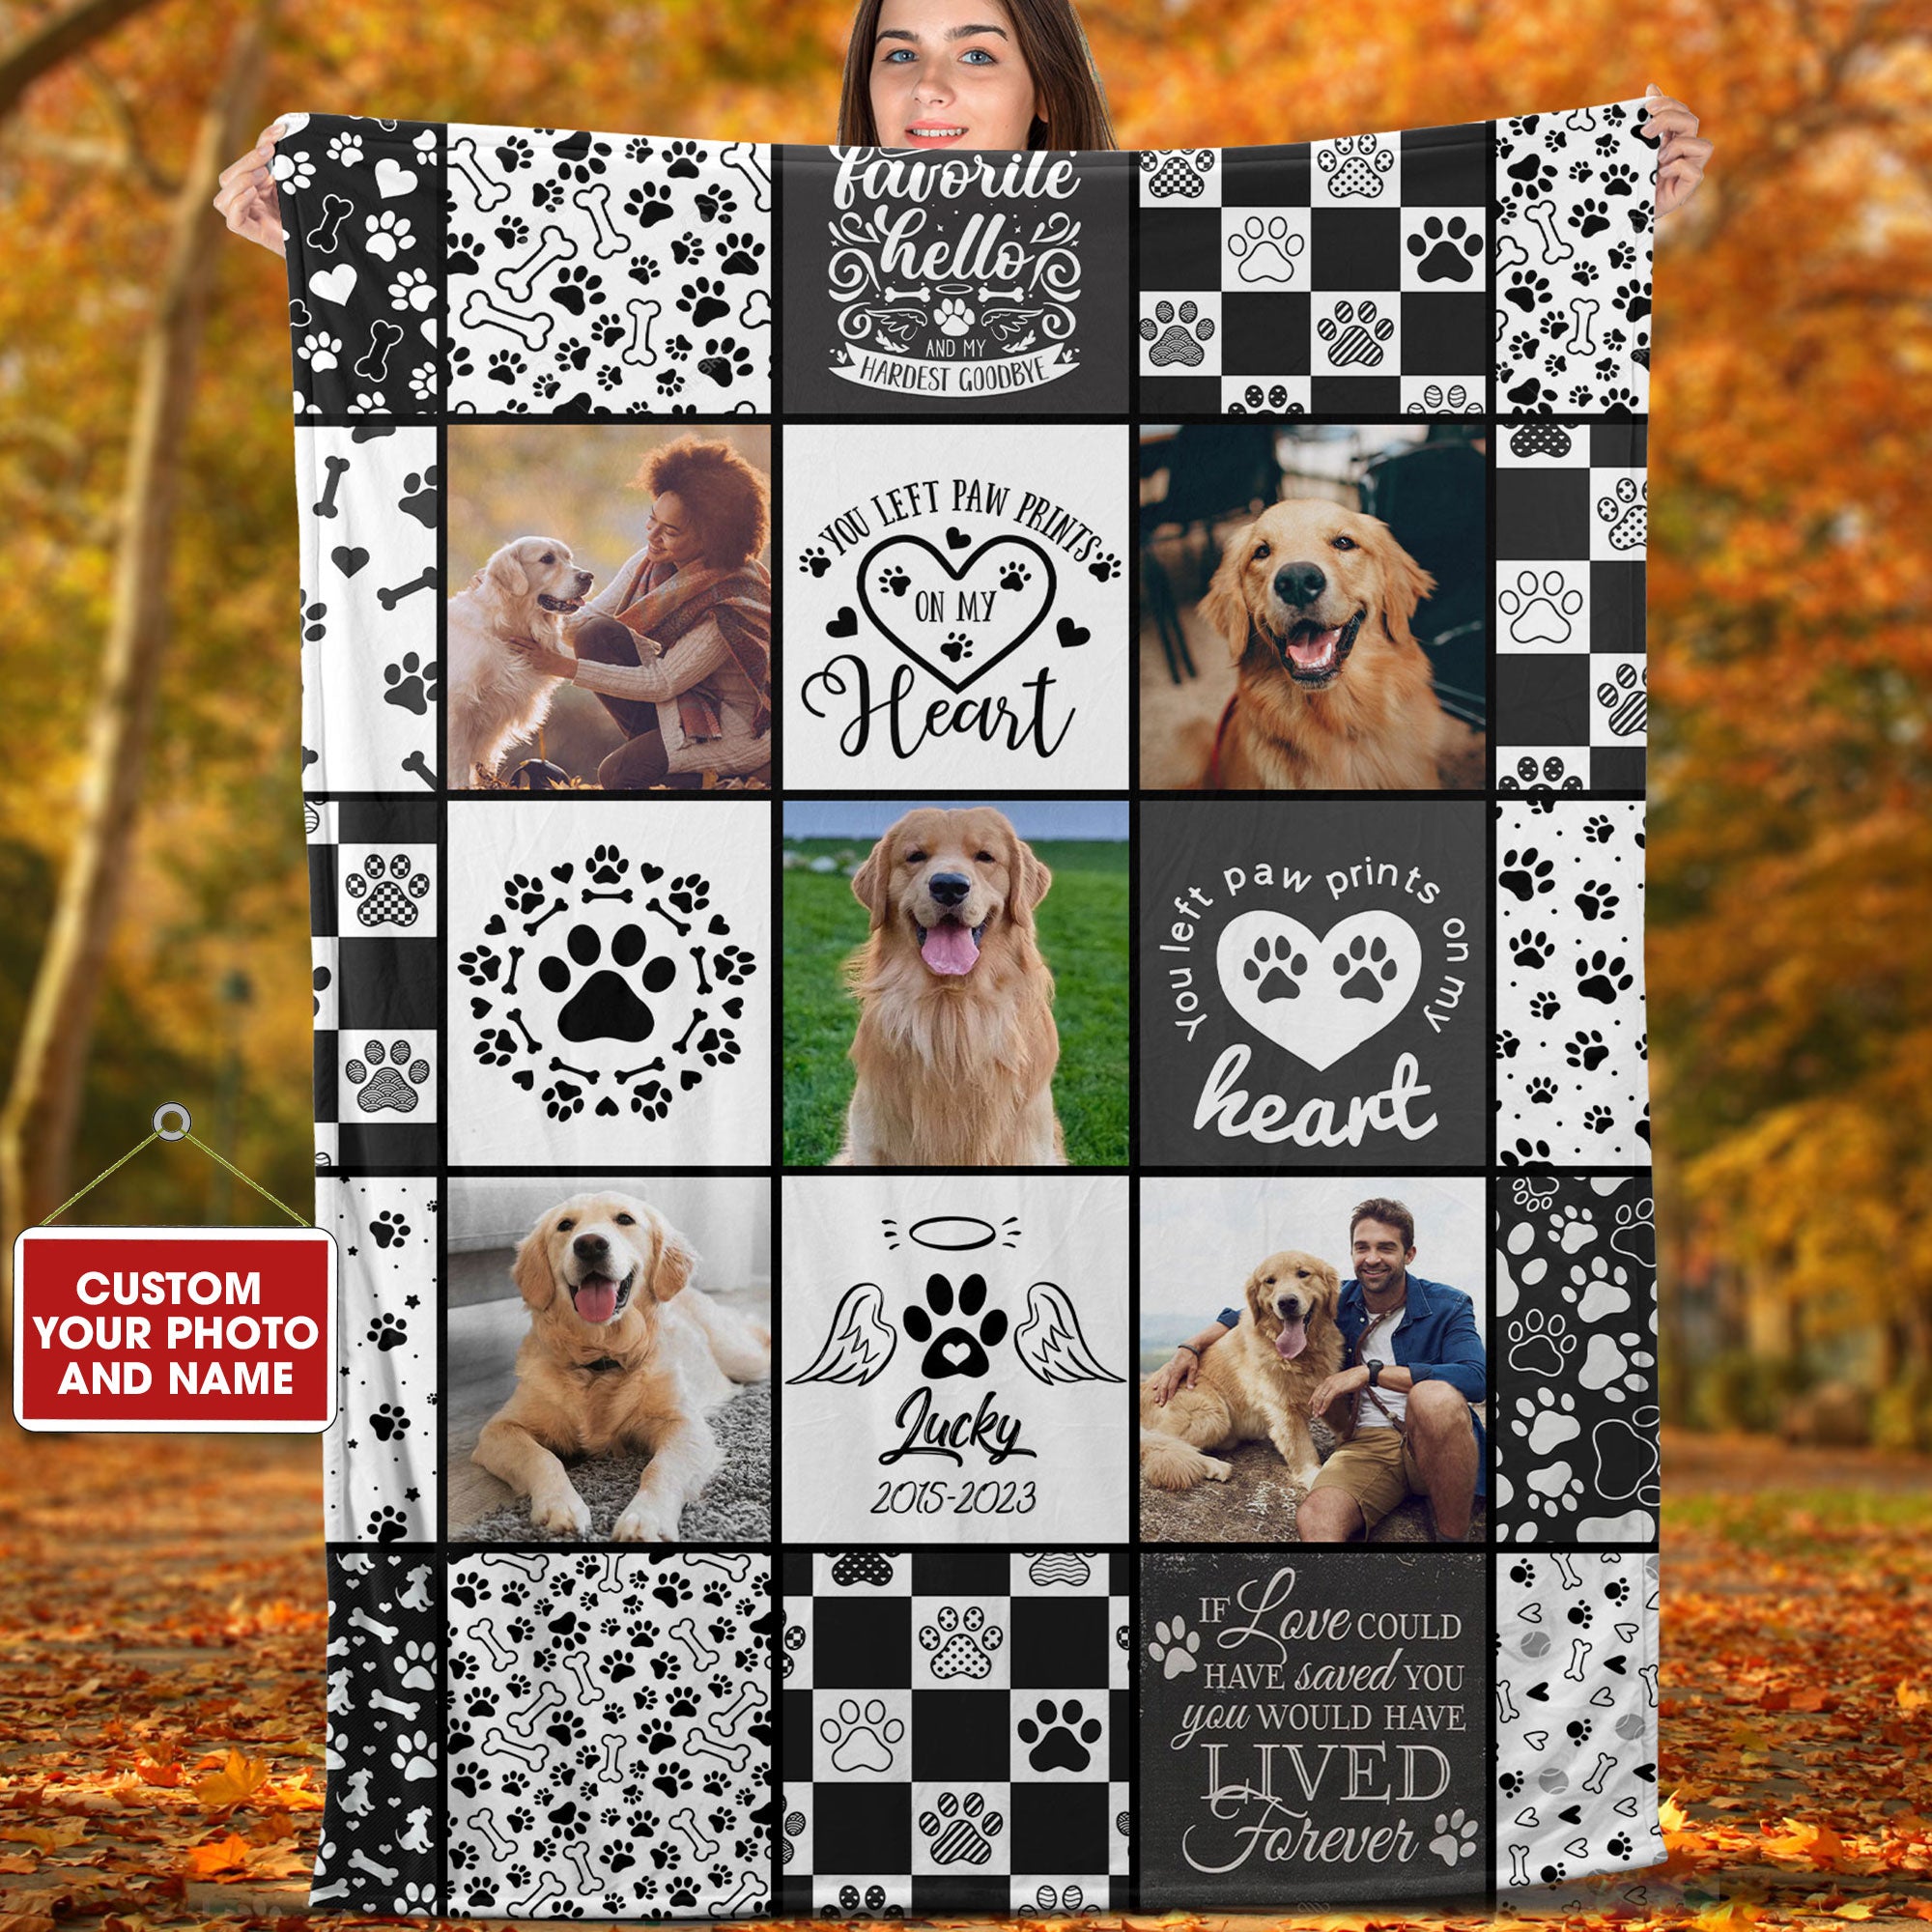 You Left Paw Prints On My Heart - Custom Photo And Name, Personalized Fleece Blanket - Gift For Pet Lover, Memorial Gift